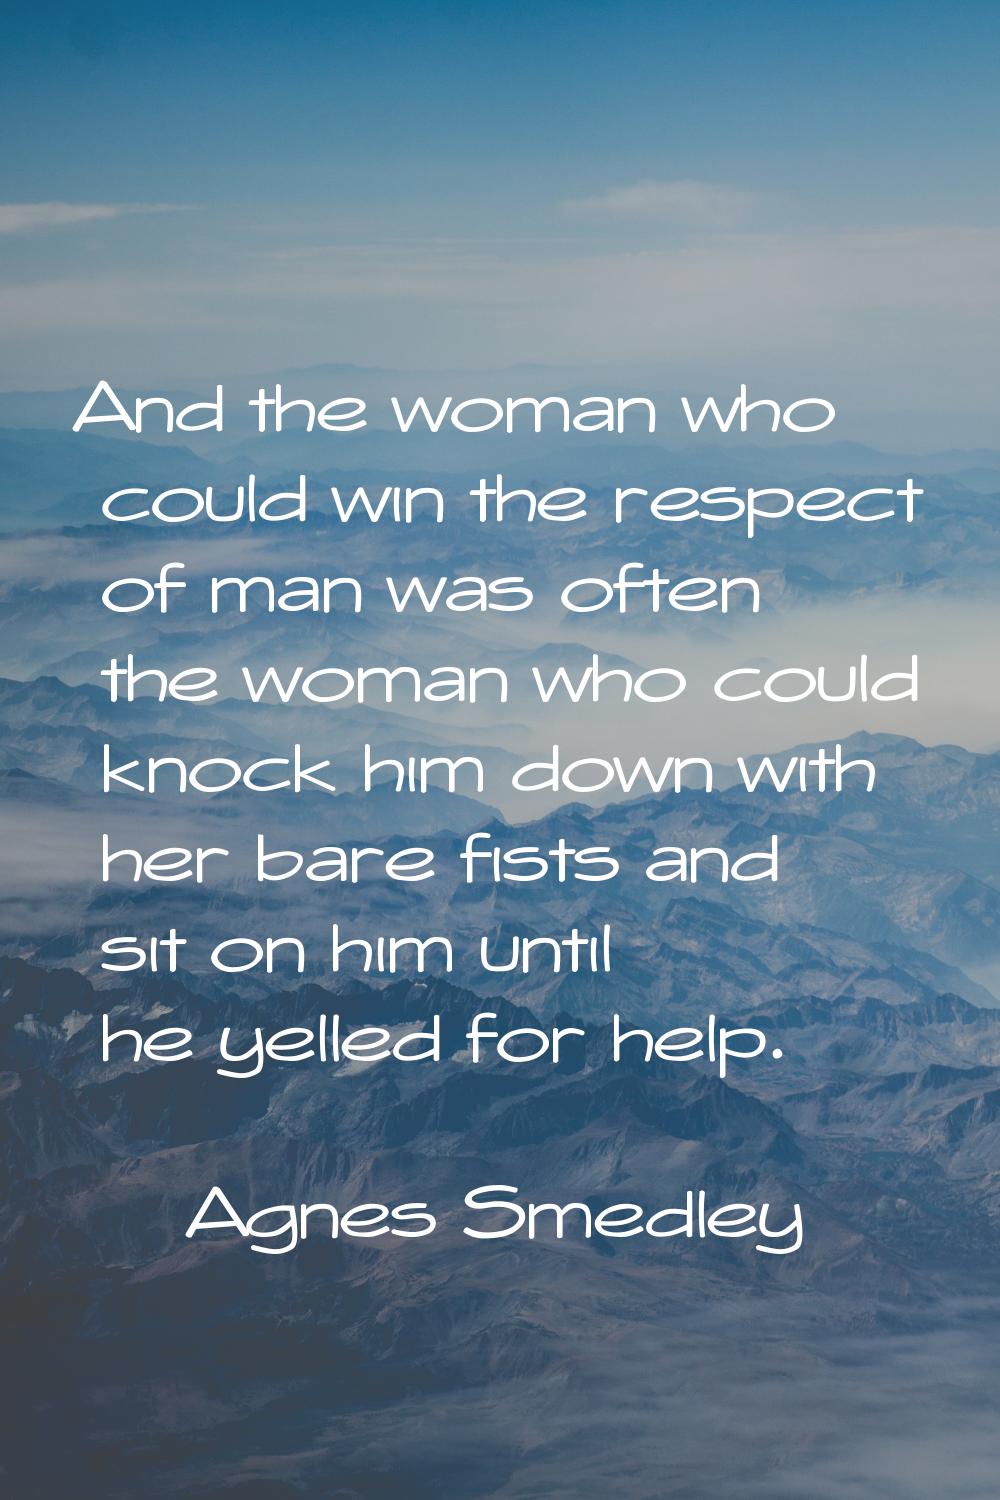 And the woman who could win the respect of man was often the woman who could knock him down with he